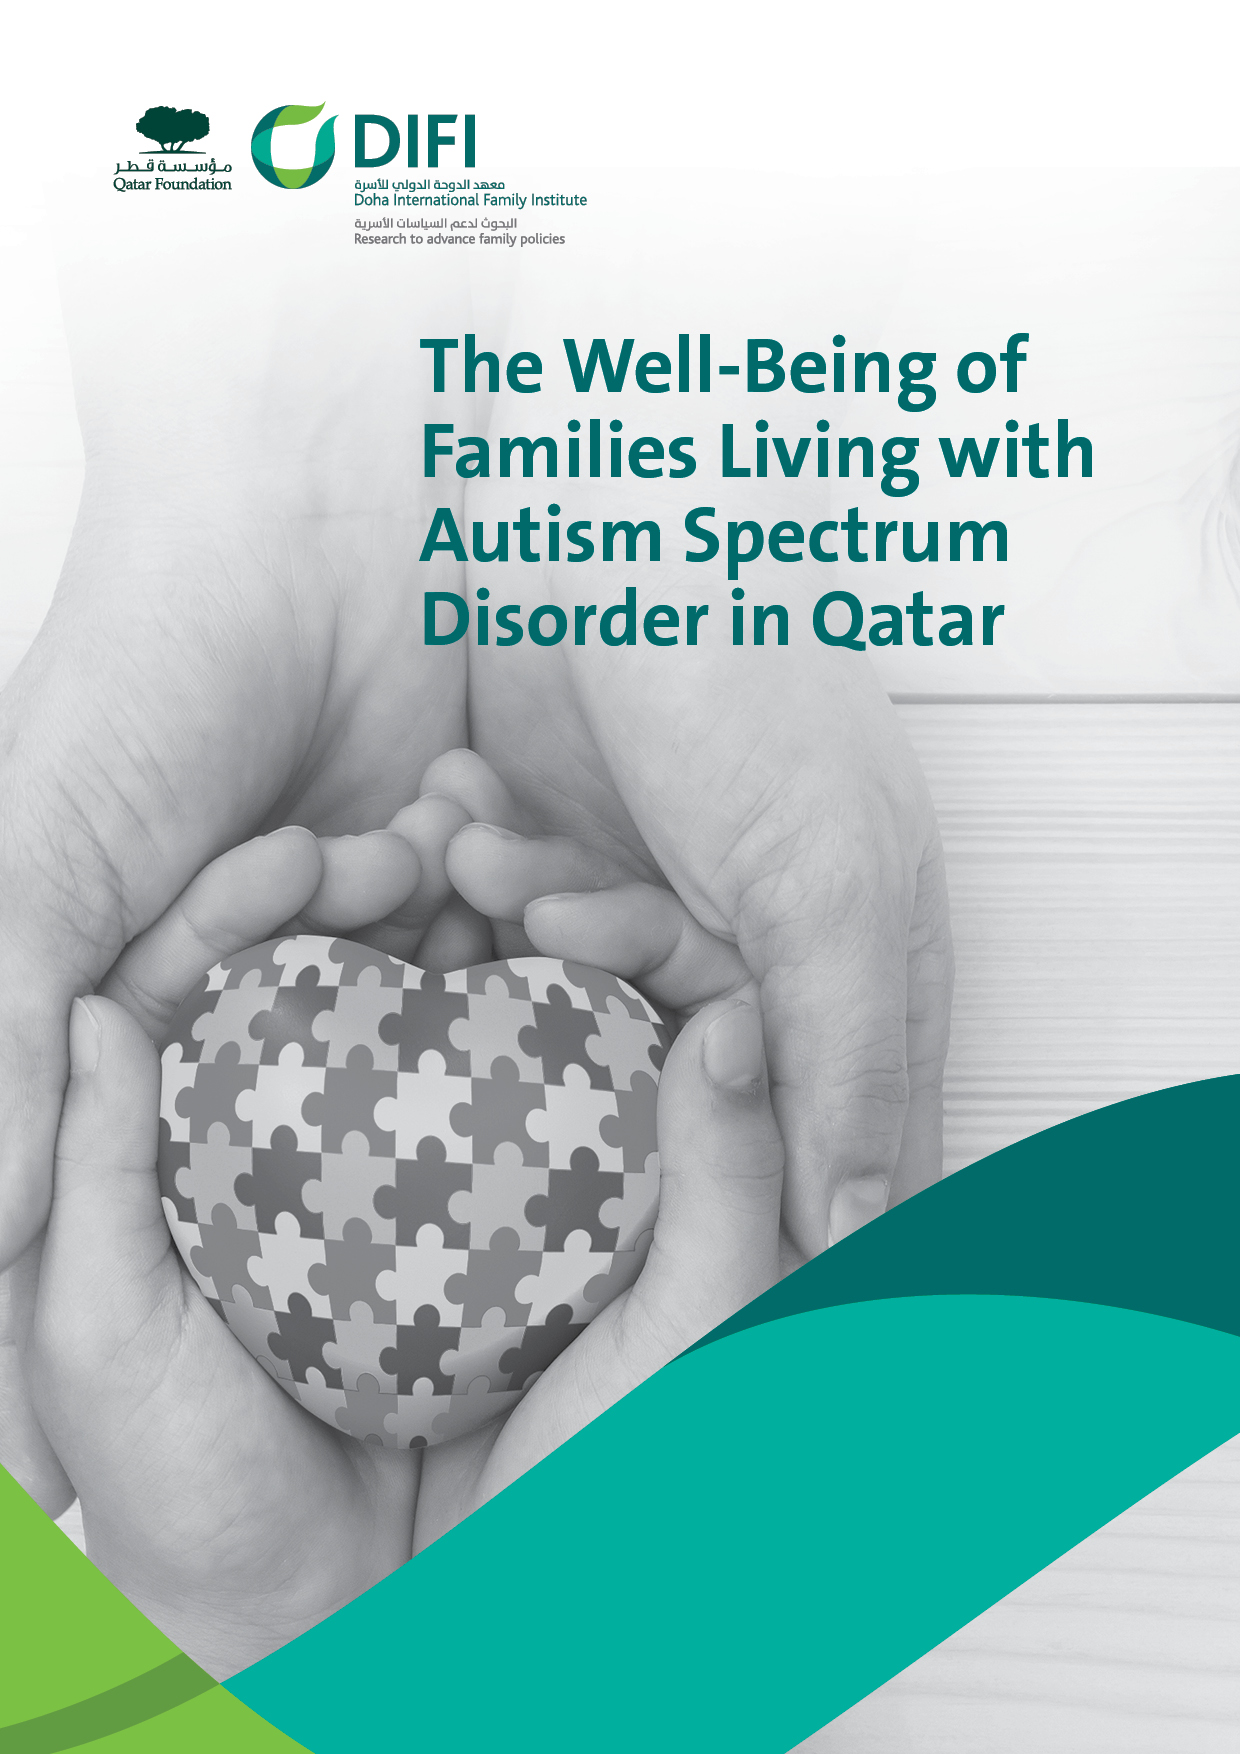 image of The Well-Being of Families Living with Autism Spectrum Disorder in Qatar